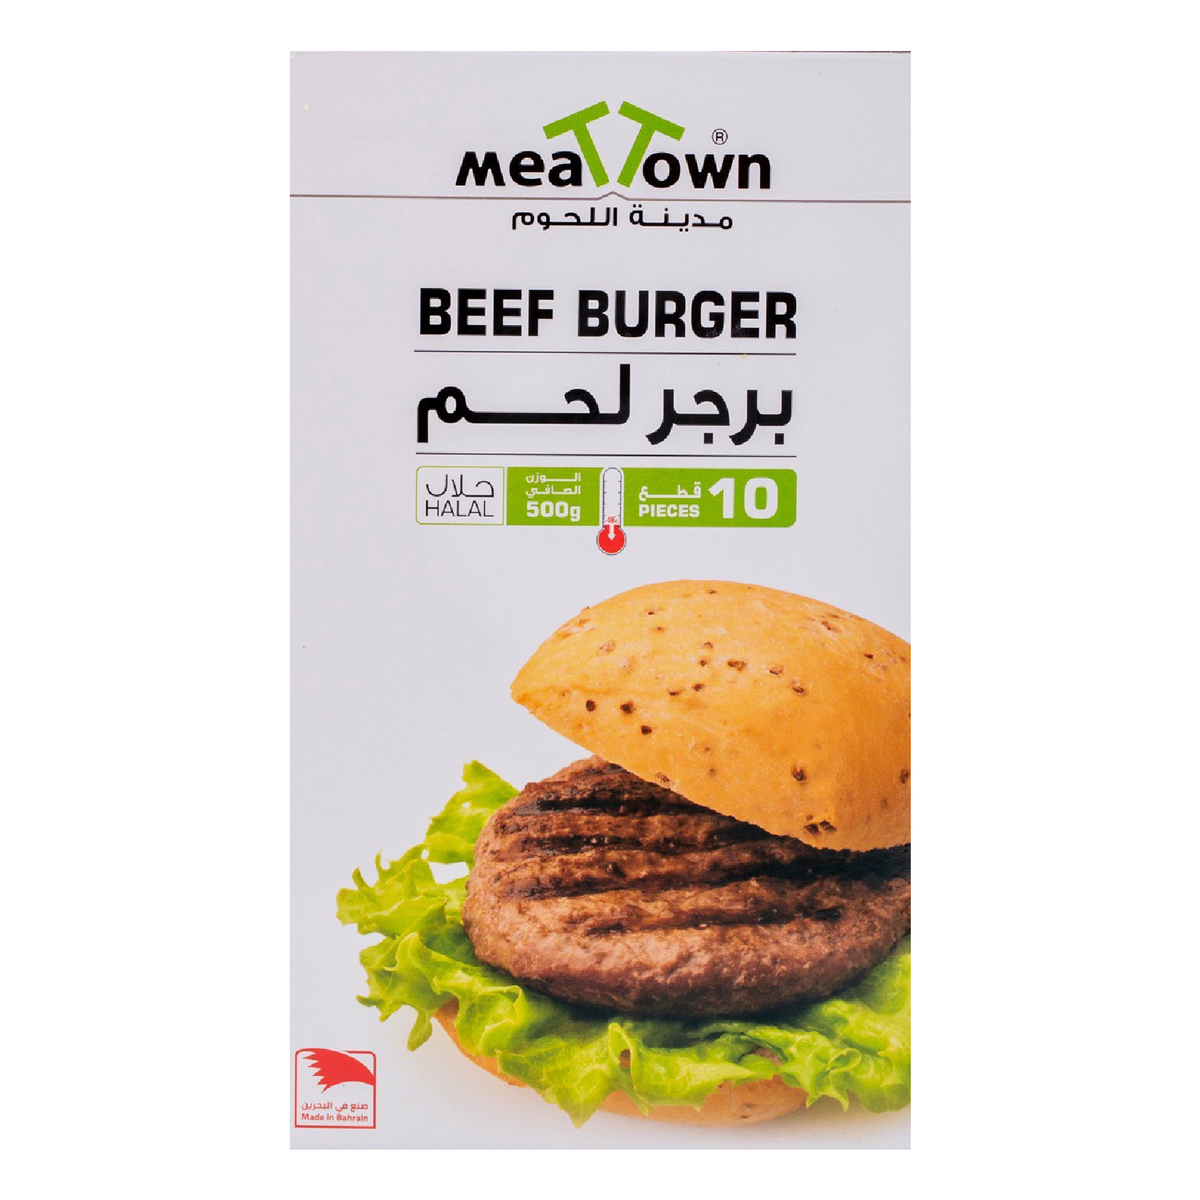 Meat Town Beef Burger Box 500g